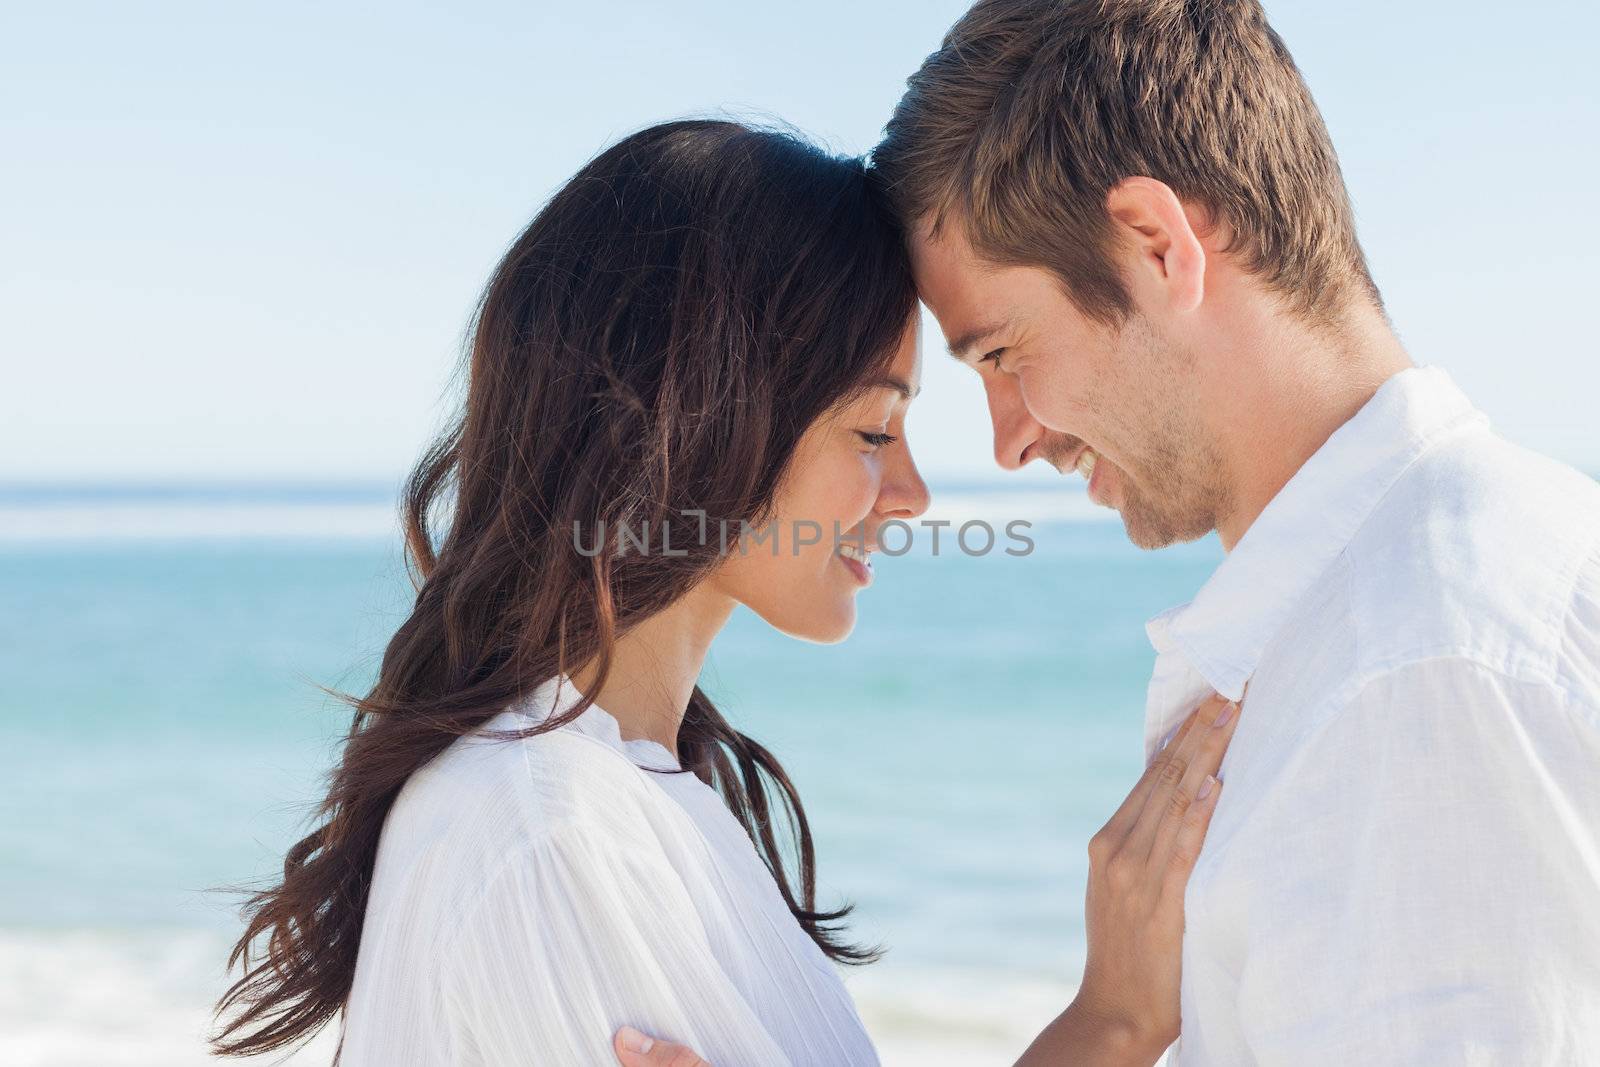 Romantic couple relaxing and embracing on the beach during the summer